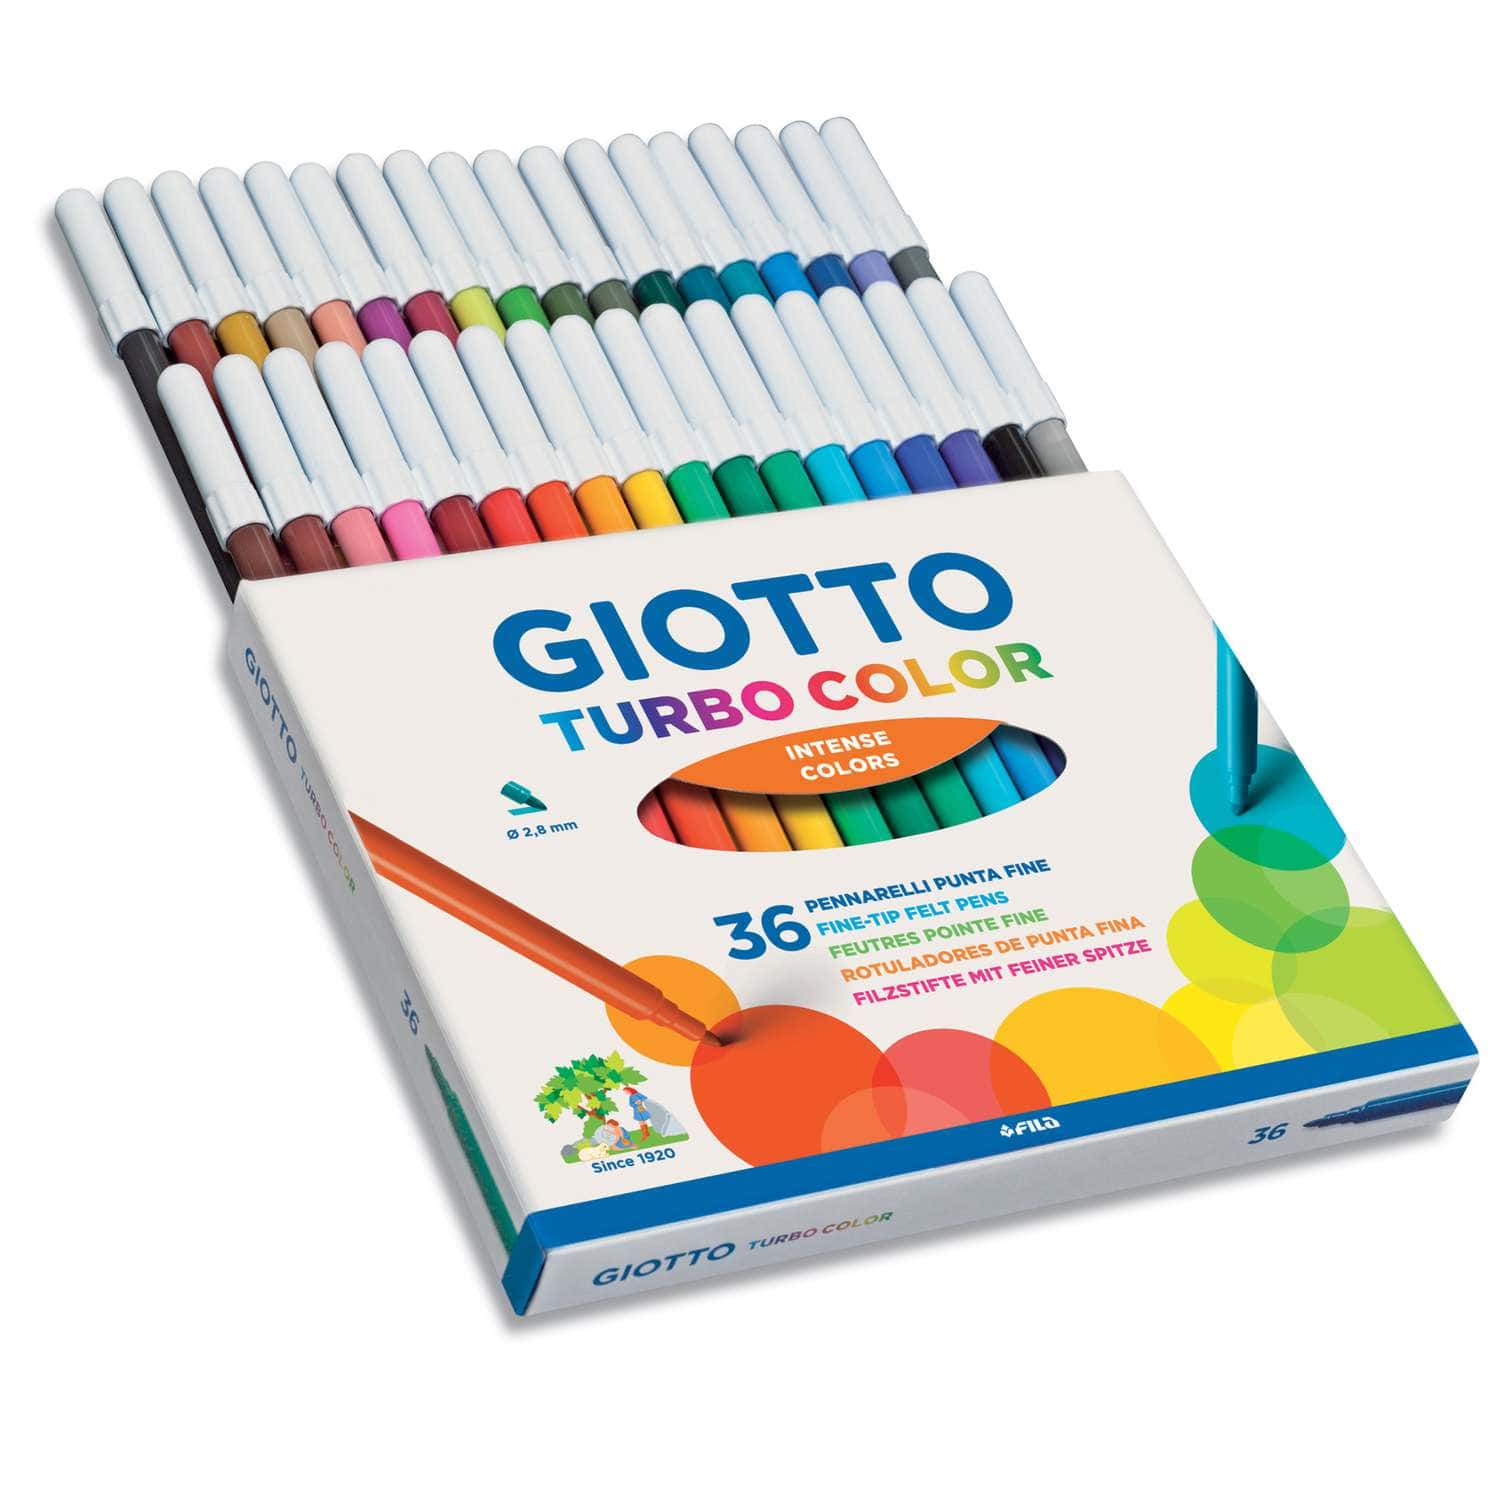 https://images.greatart.co.uk/out/pictures/generated/1500_1500/391722/Giotto+Turbo+Color+Fibre+Pen+Sets%2C+36+pens.jpg